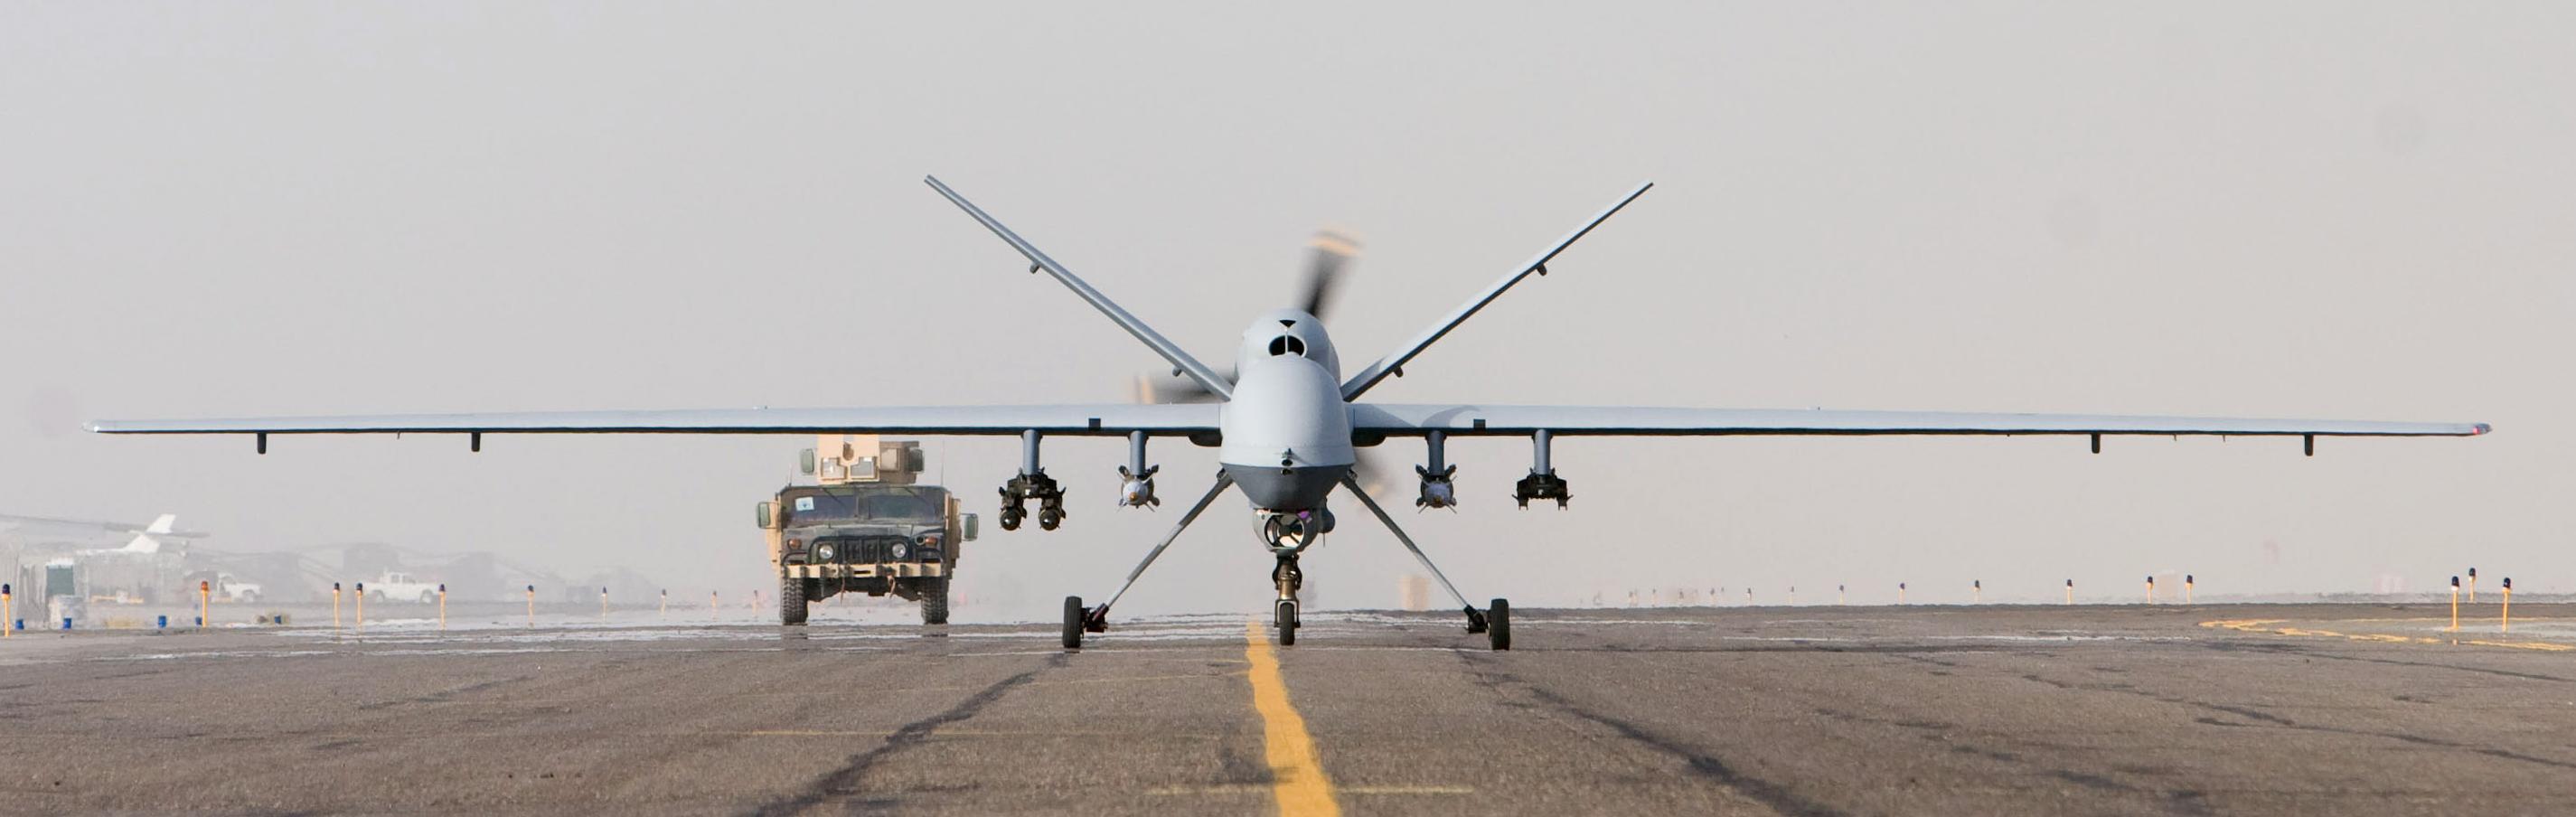 Exporting “drone wars”: US drones to strike ISIS targets from Sigonella